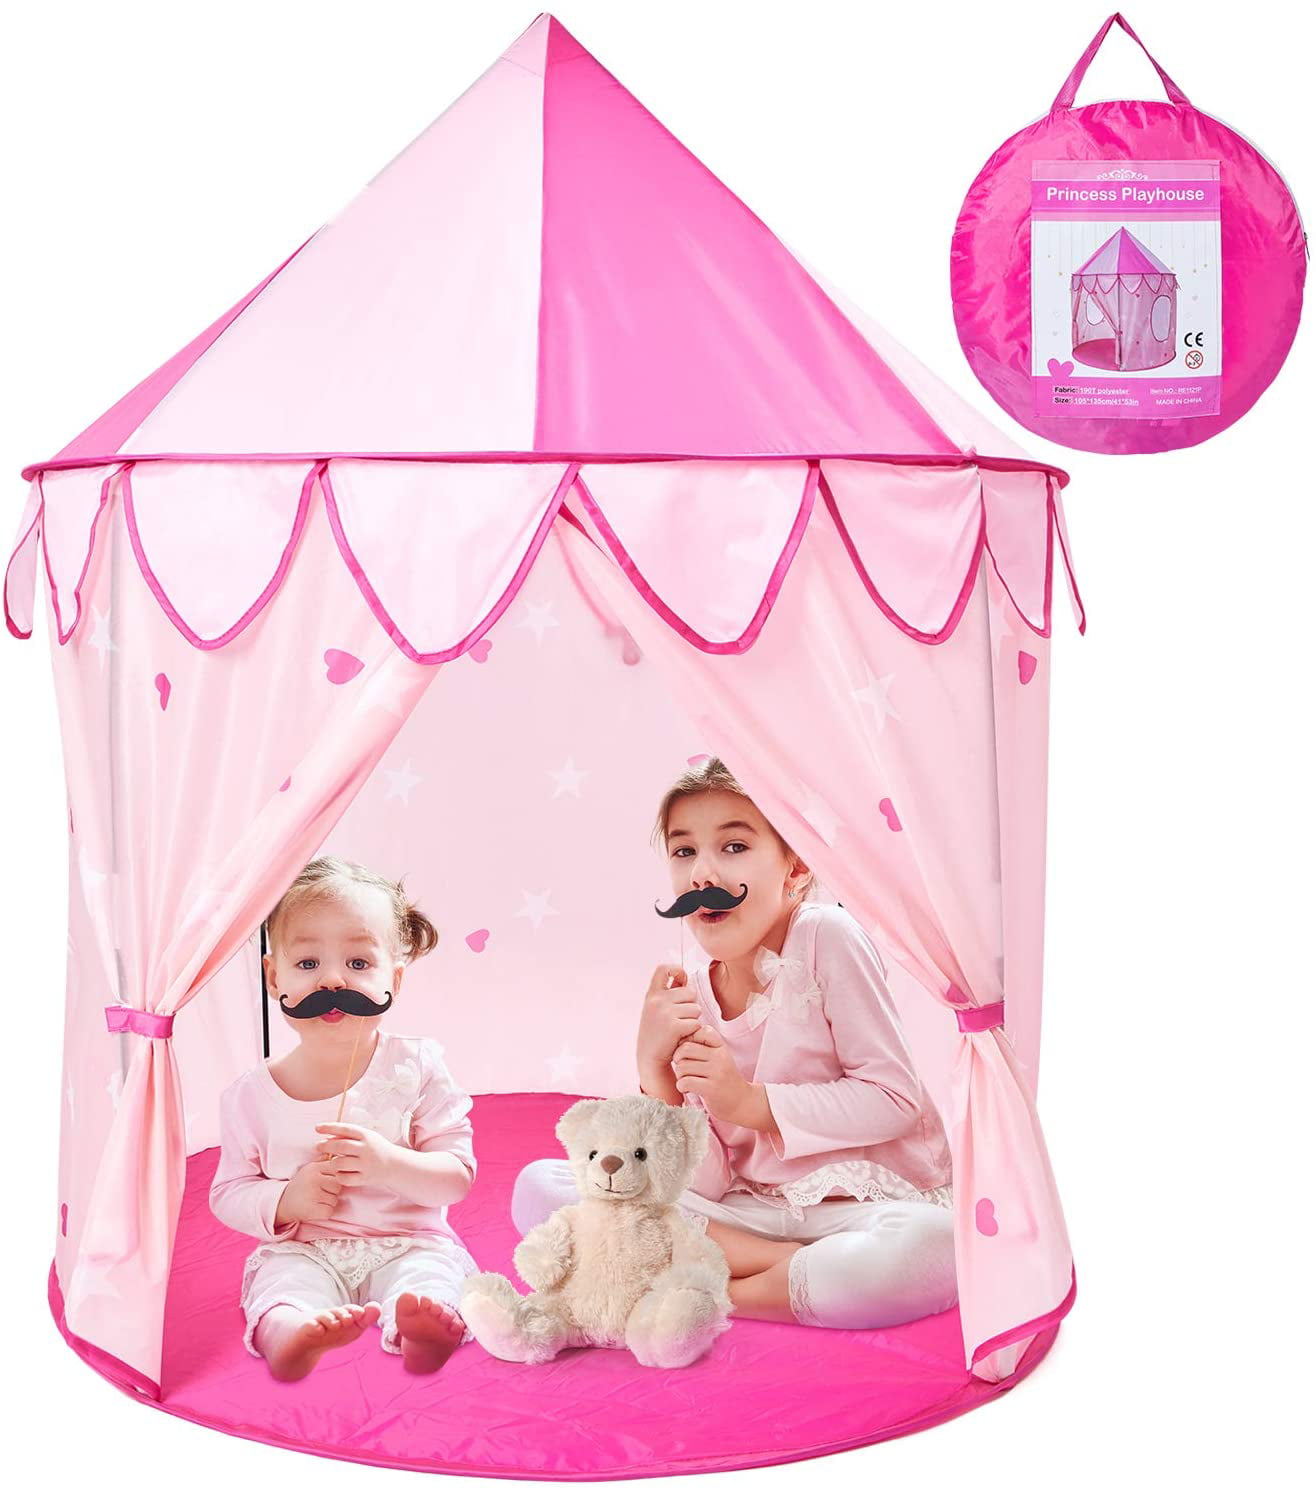 Portable Pop Up Play Tent Kids Girl Princess Castle Outdoor Play House Pink 